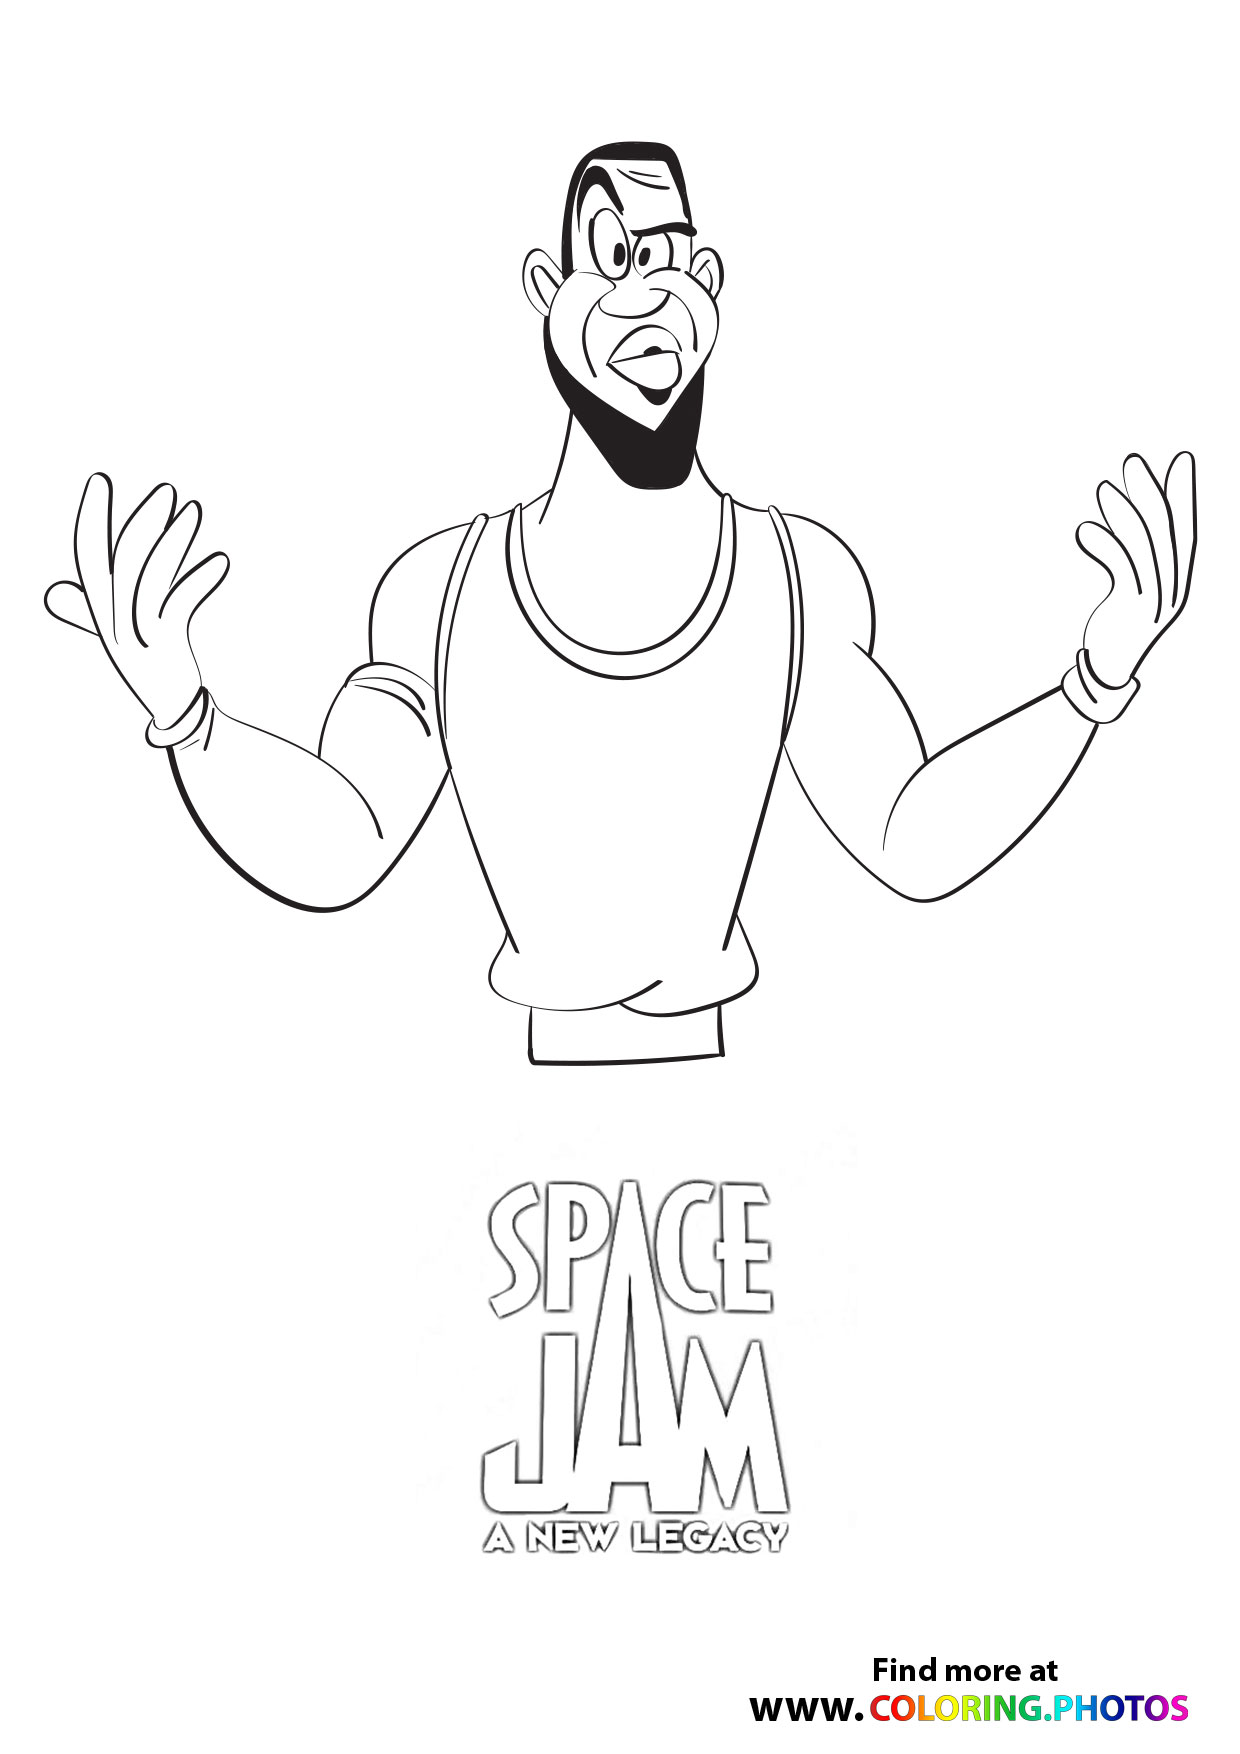 Online Dictionary  space jam nba coloring pages   Google Search